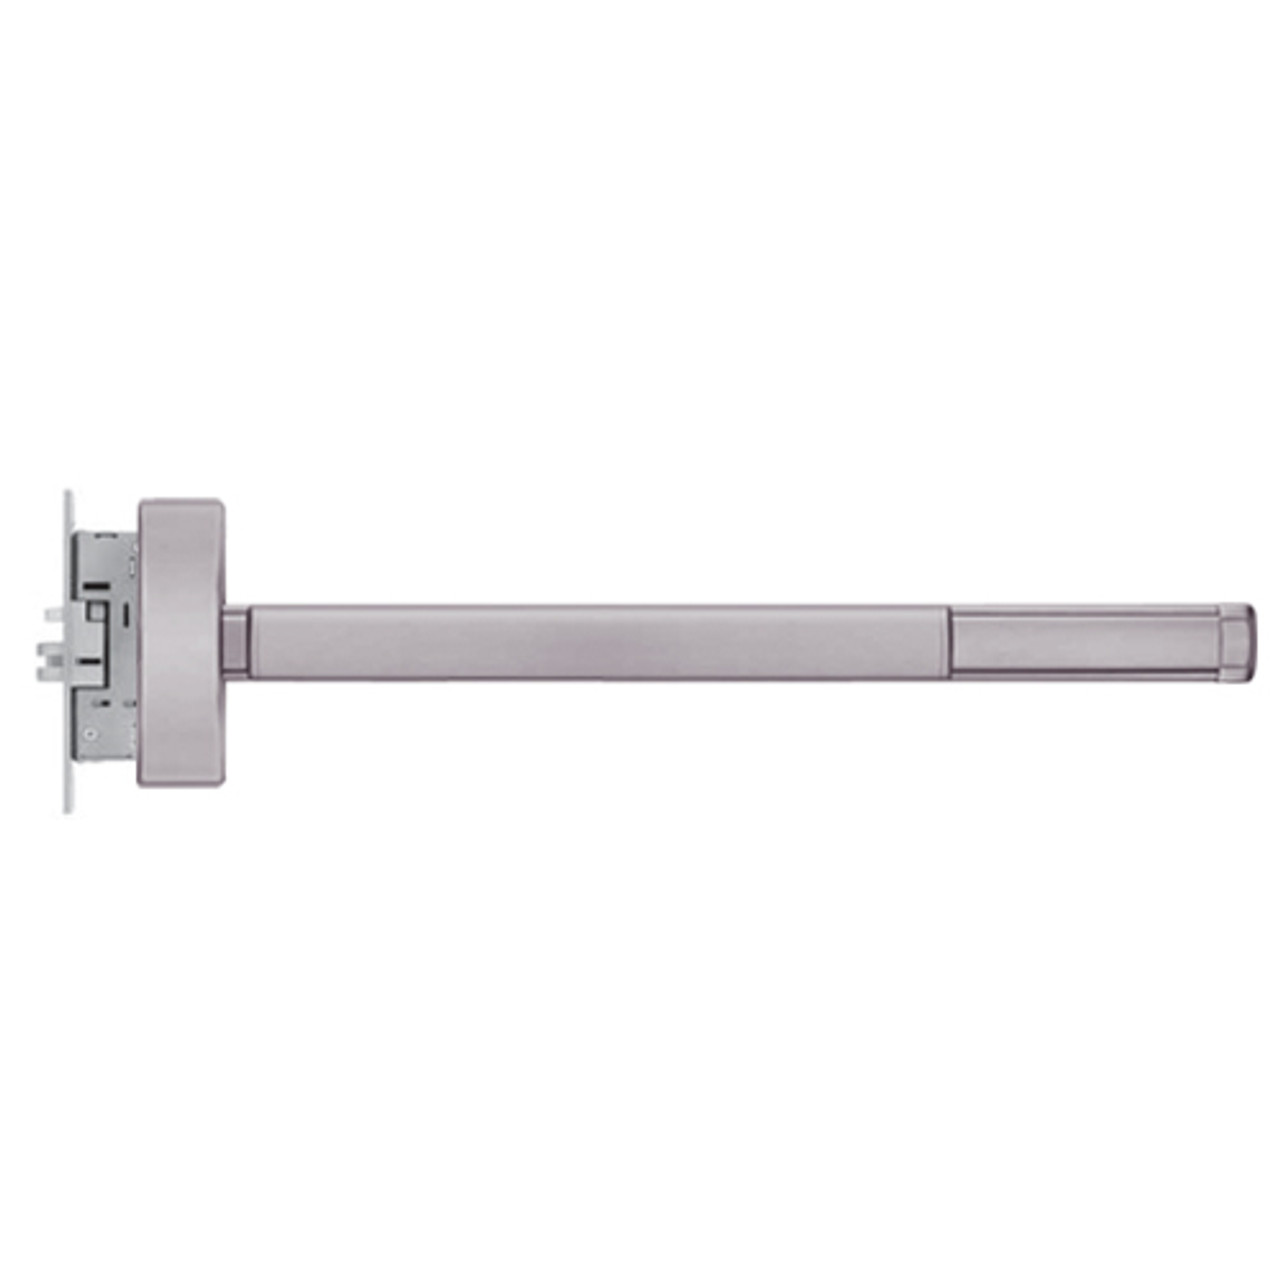 2303CD-LHR-630-48 PHI 2300 Series Non Fire Rated Apex Mortise Exit Device Prepped for Key Retracts Latchbolt with Cylinder Dogging in Satin Stainless Steel Finish